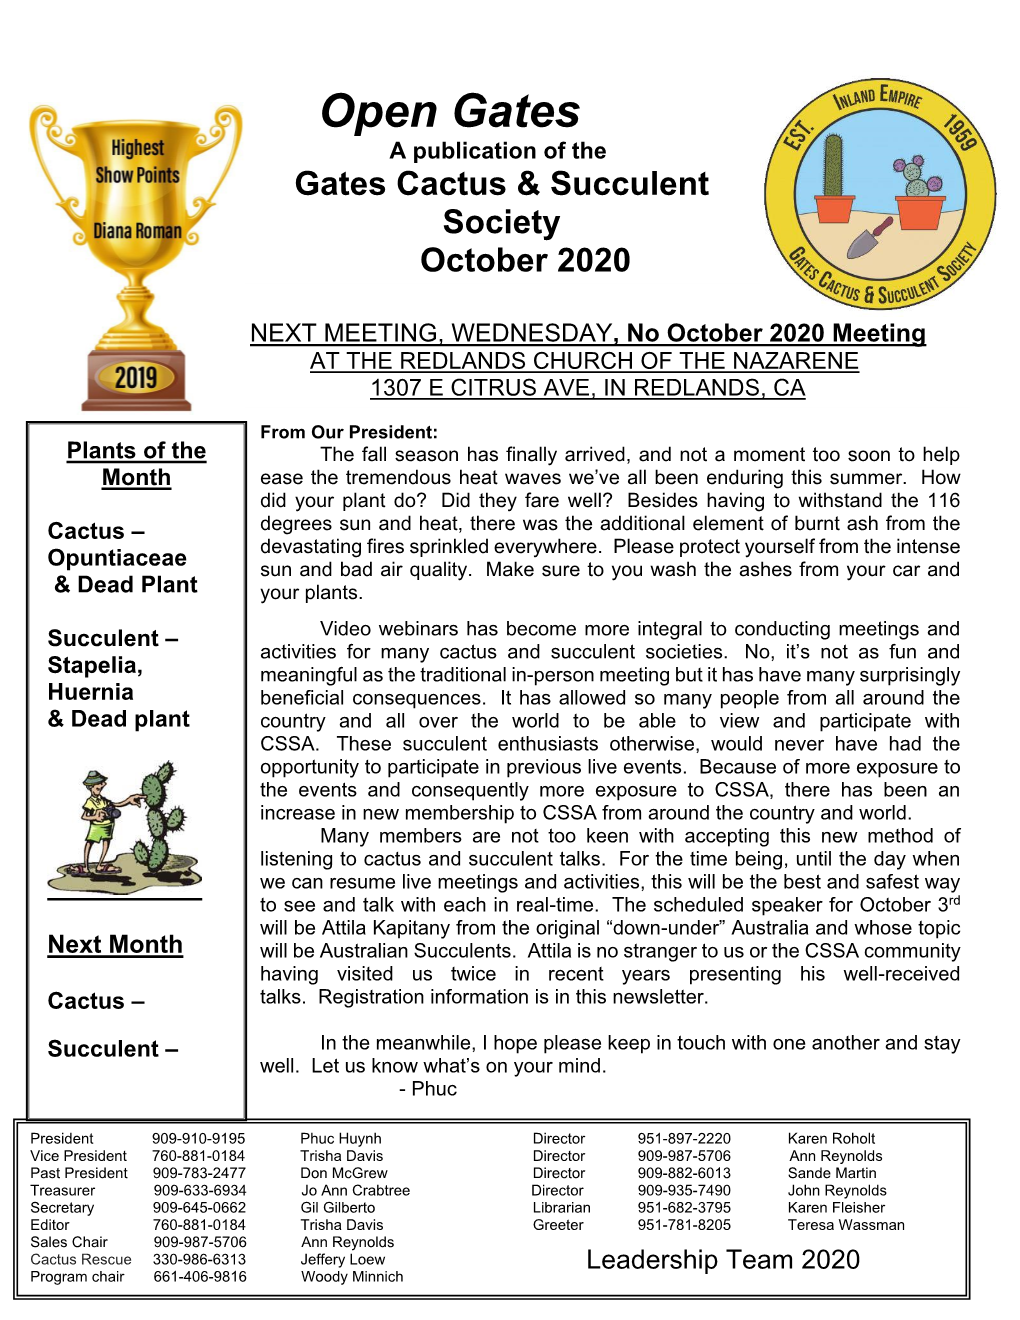 Open Gates a Publication of the Gates Cactus & Succulent Society October 2020